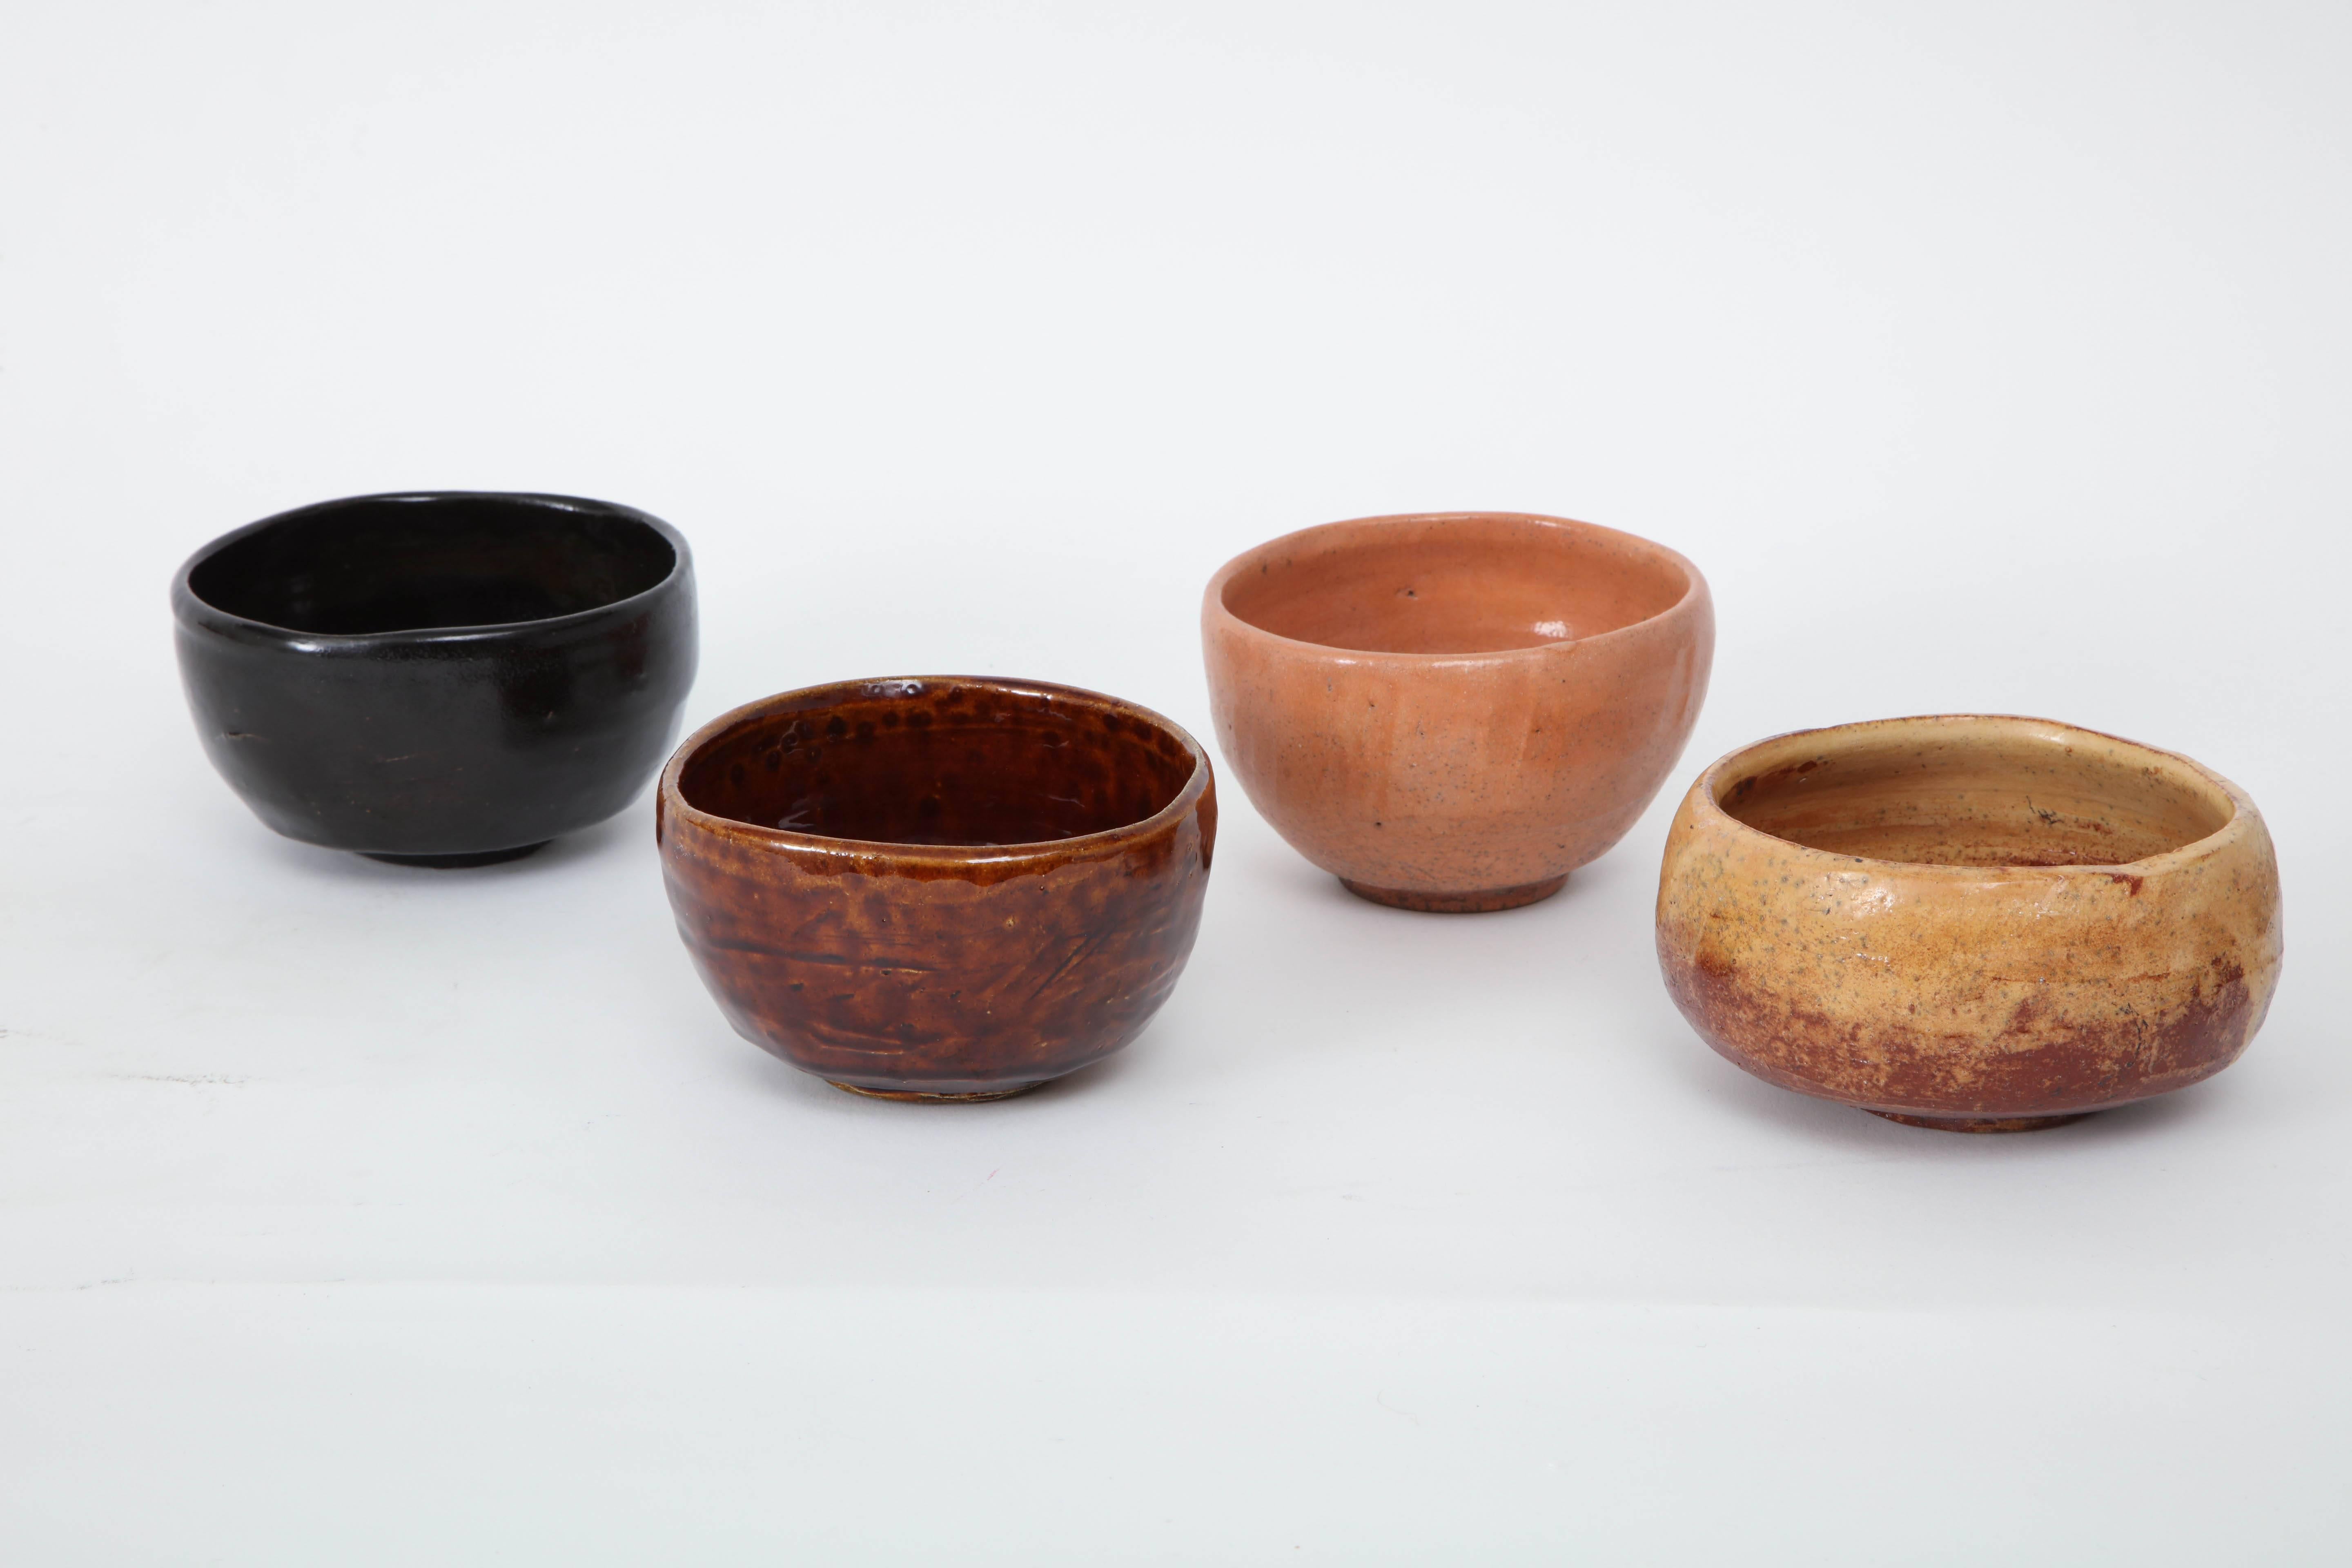 Richard Hirsch's Set of 4 Raku Tea Bowls, 1996 - 1997 In Excellent Condition For Sale In New York, NY